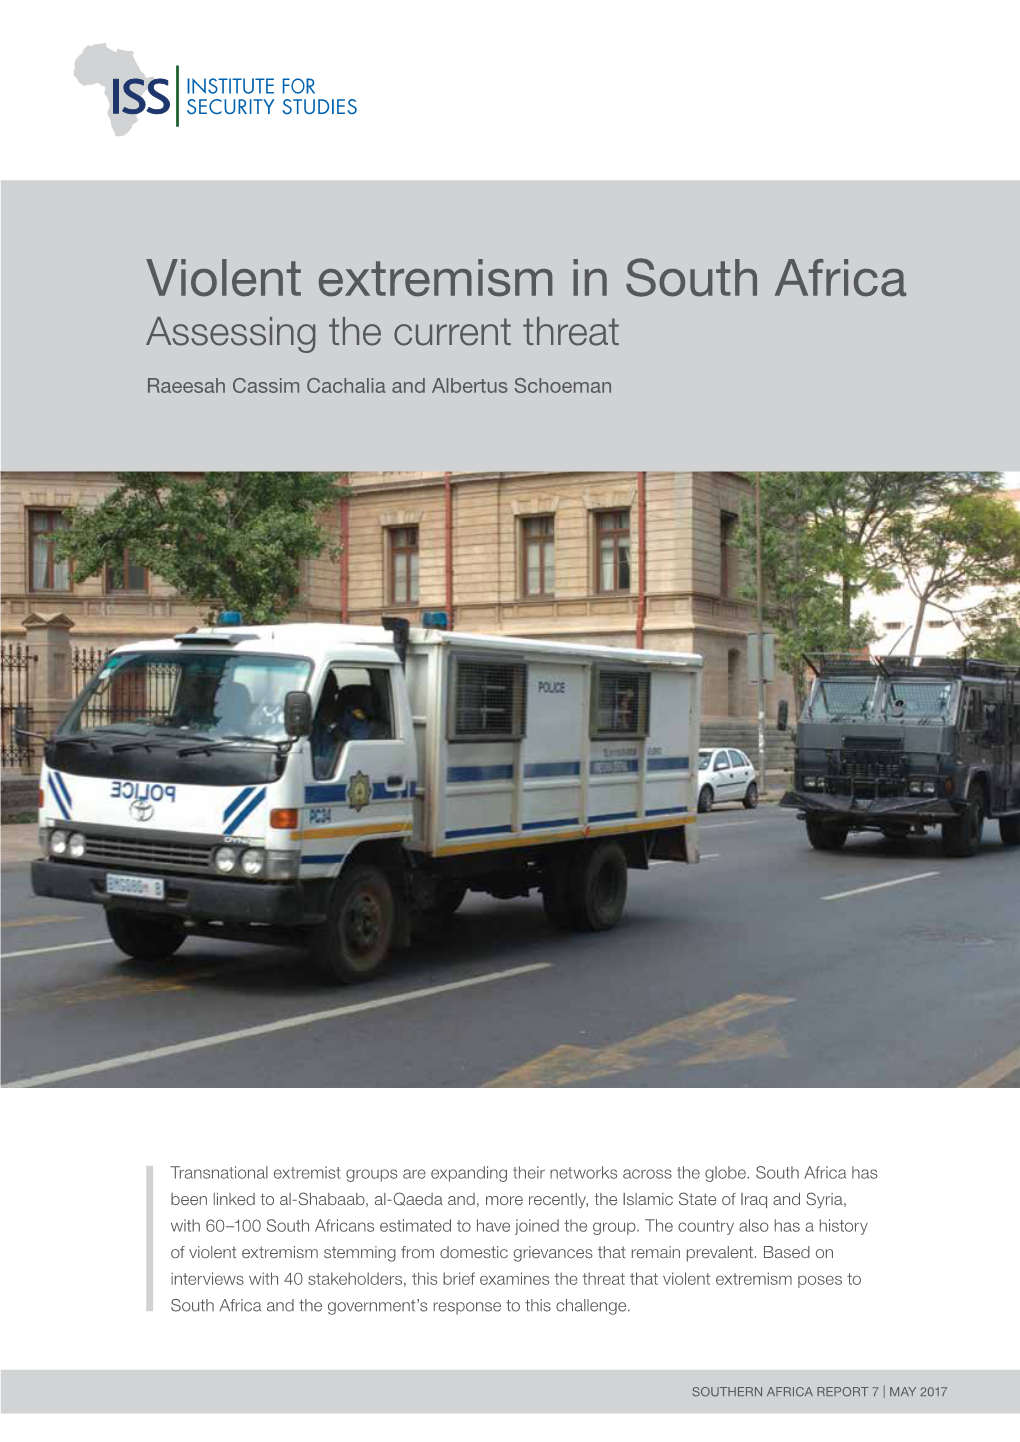 Violent Extremism in South Africa Assessing the Current Threat